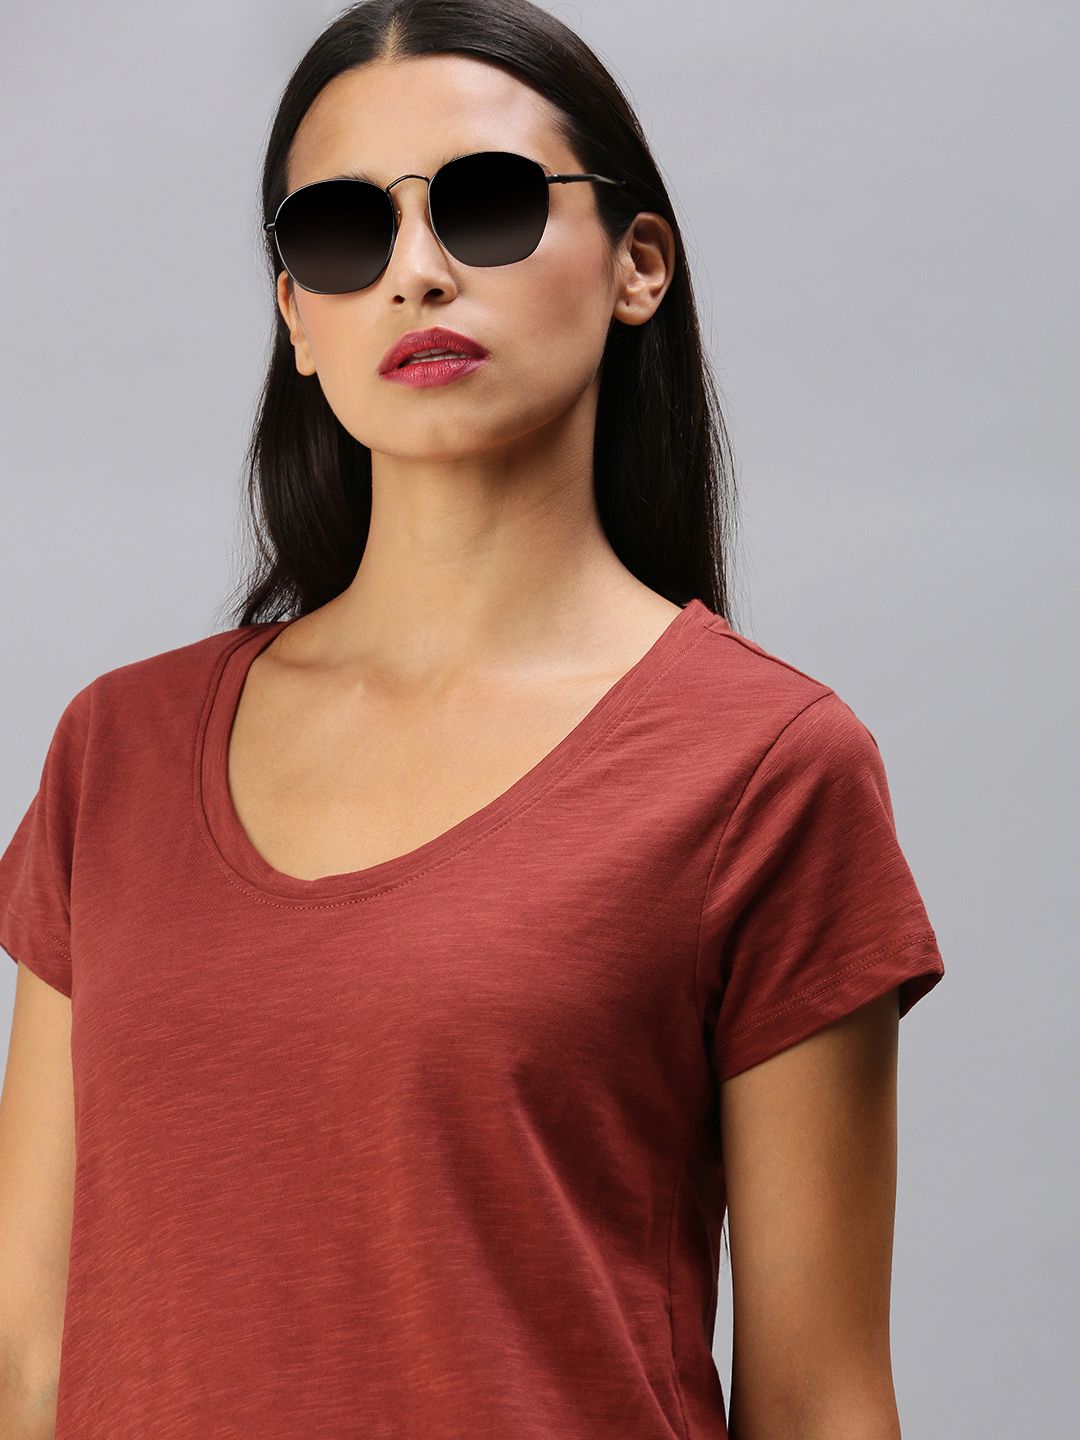 The Roadster Lifestyle Co Women Rust Red Solid V-Neck Pure Cotton T-shirt Price in India